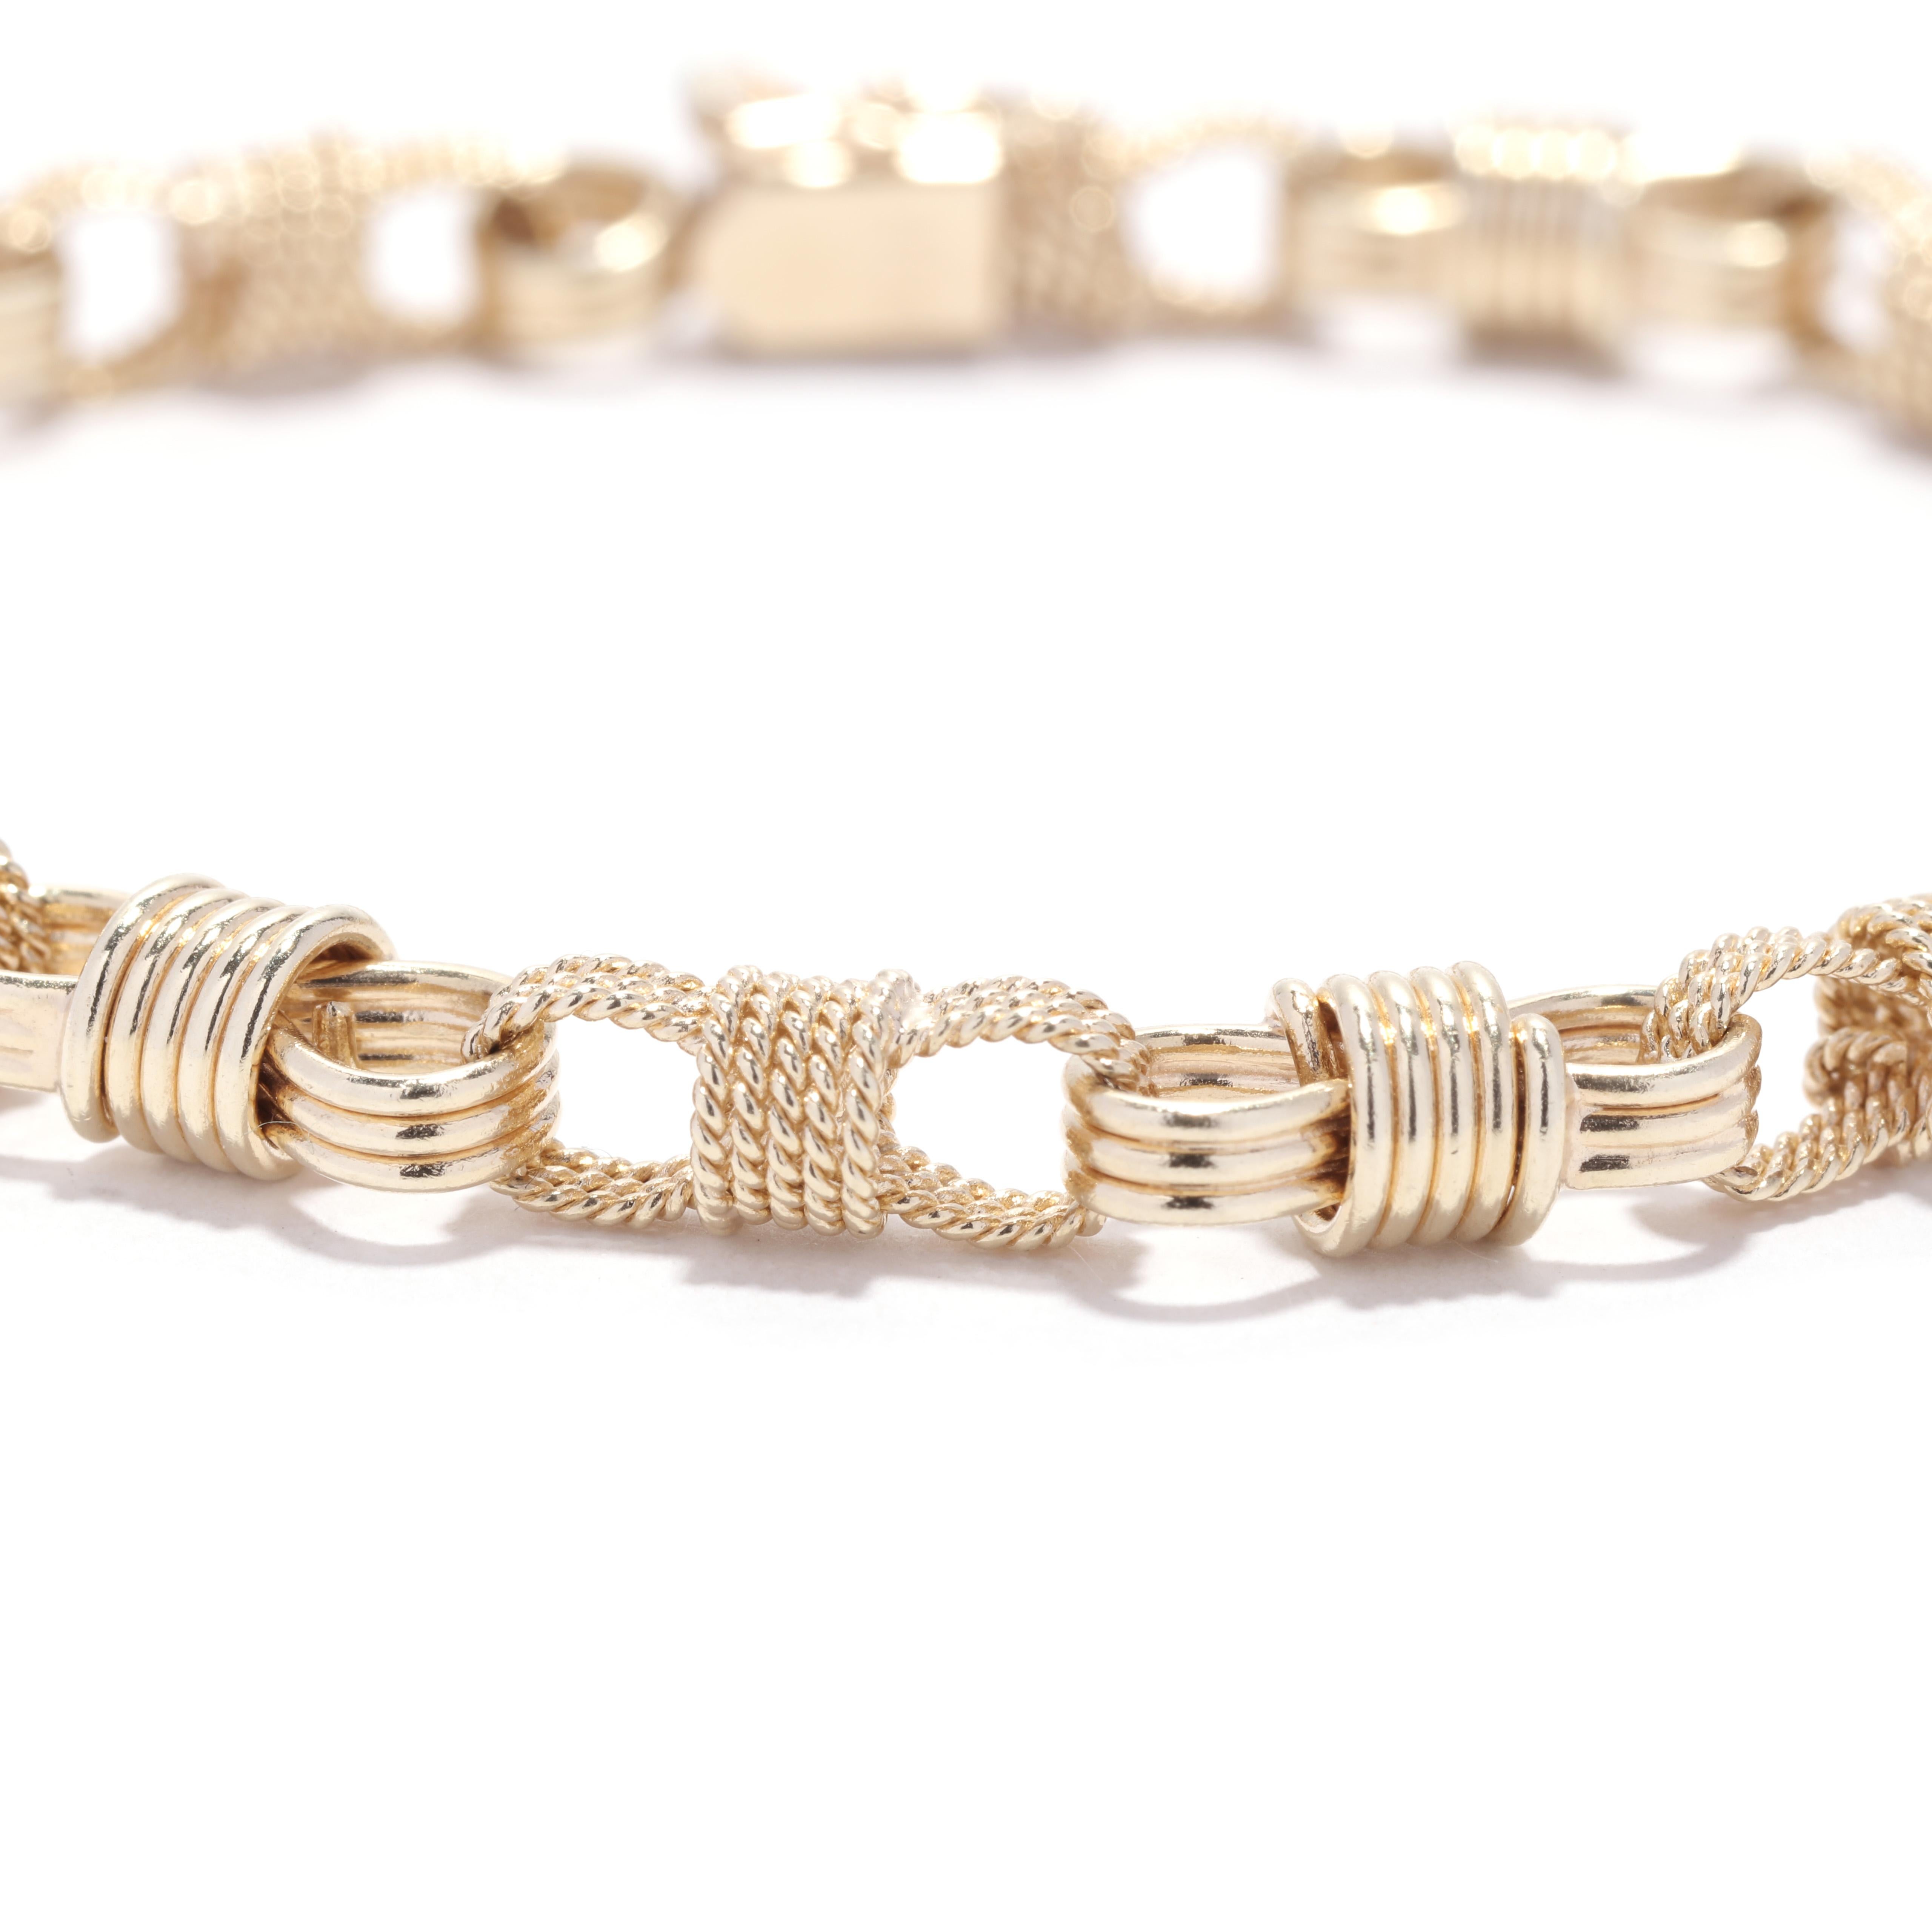 A vintage 14 karat yellow gold rope knot link bracelet. This simple stackable bracelet features alternating rope motif and plain figure eight knot links and with a box clasp.

Length: 7.5 in.

Width: 1/4 in.

Weight: 11.1 dwts. / 17.26